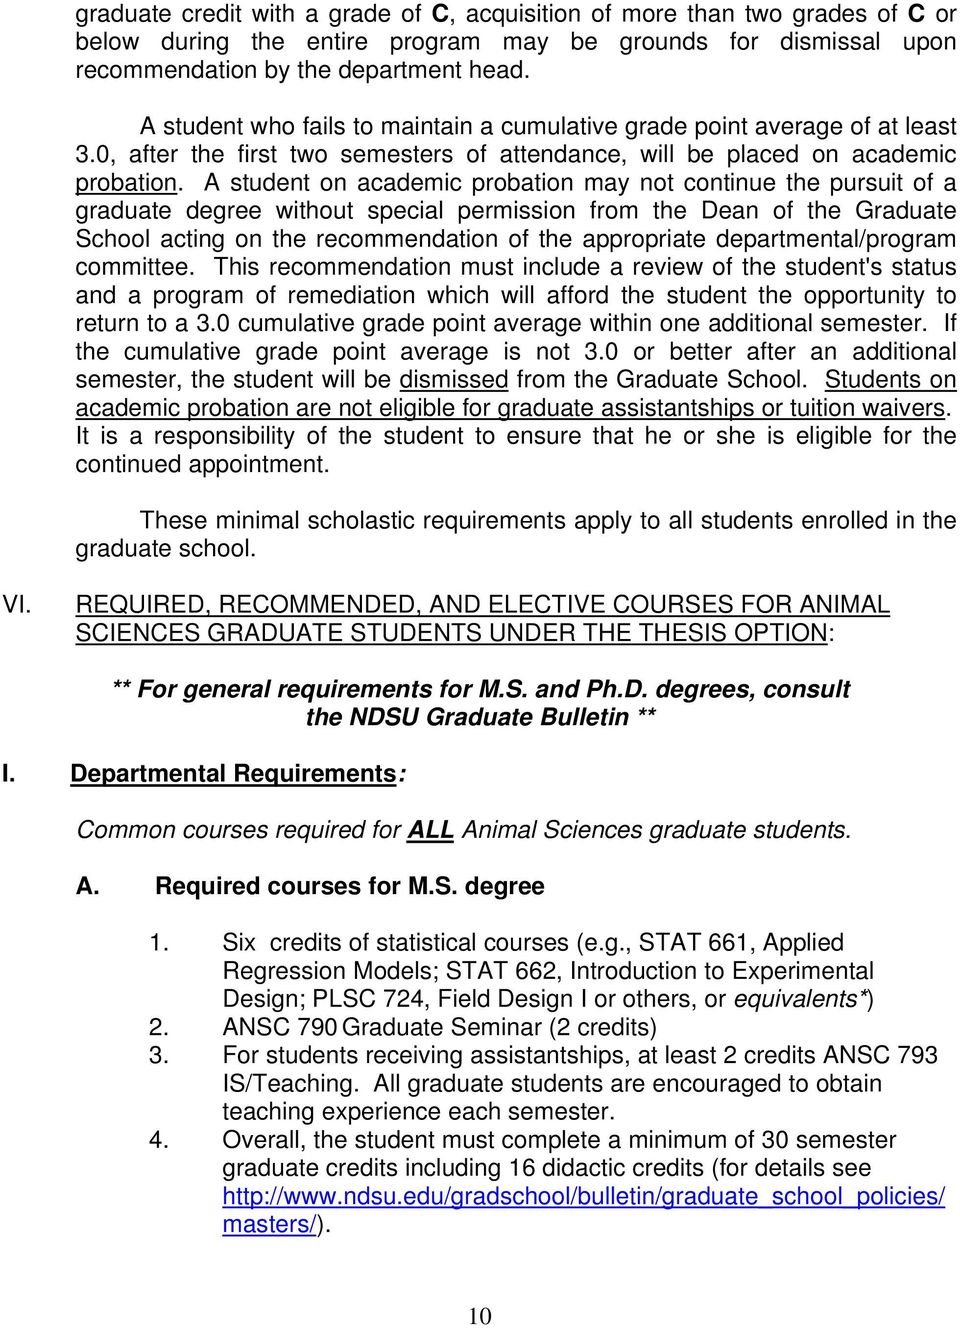 A student on academic probation may not continue the pursuit of a graduate degree without special permission from the Dean of the Graduate School acting on the recommendation of the appropriate